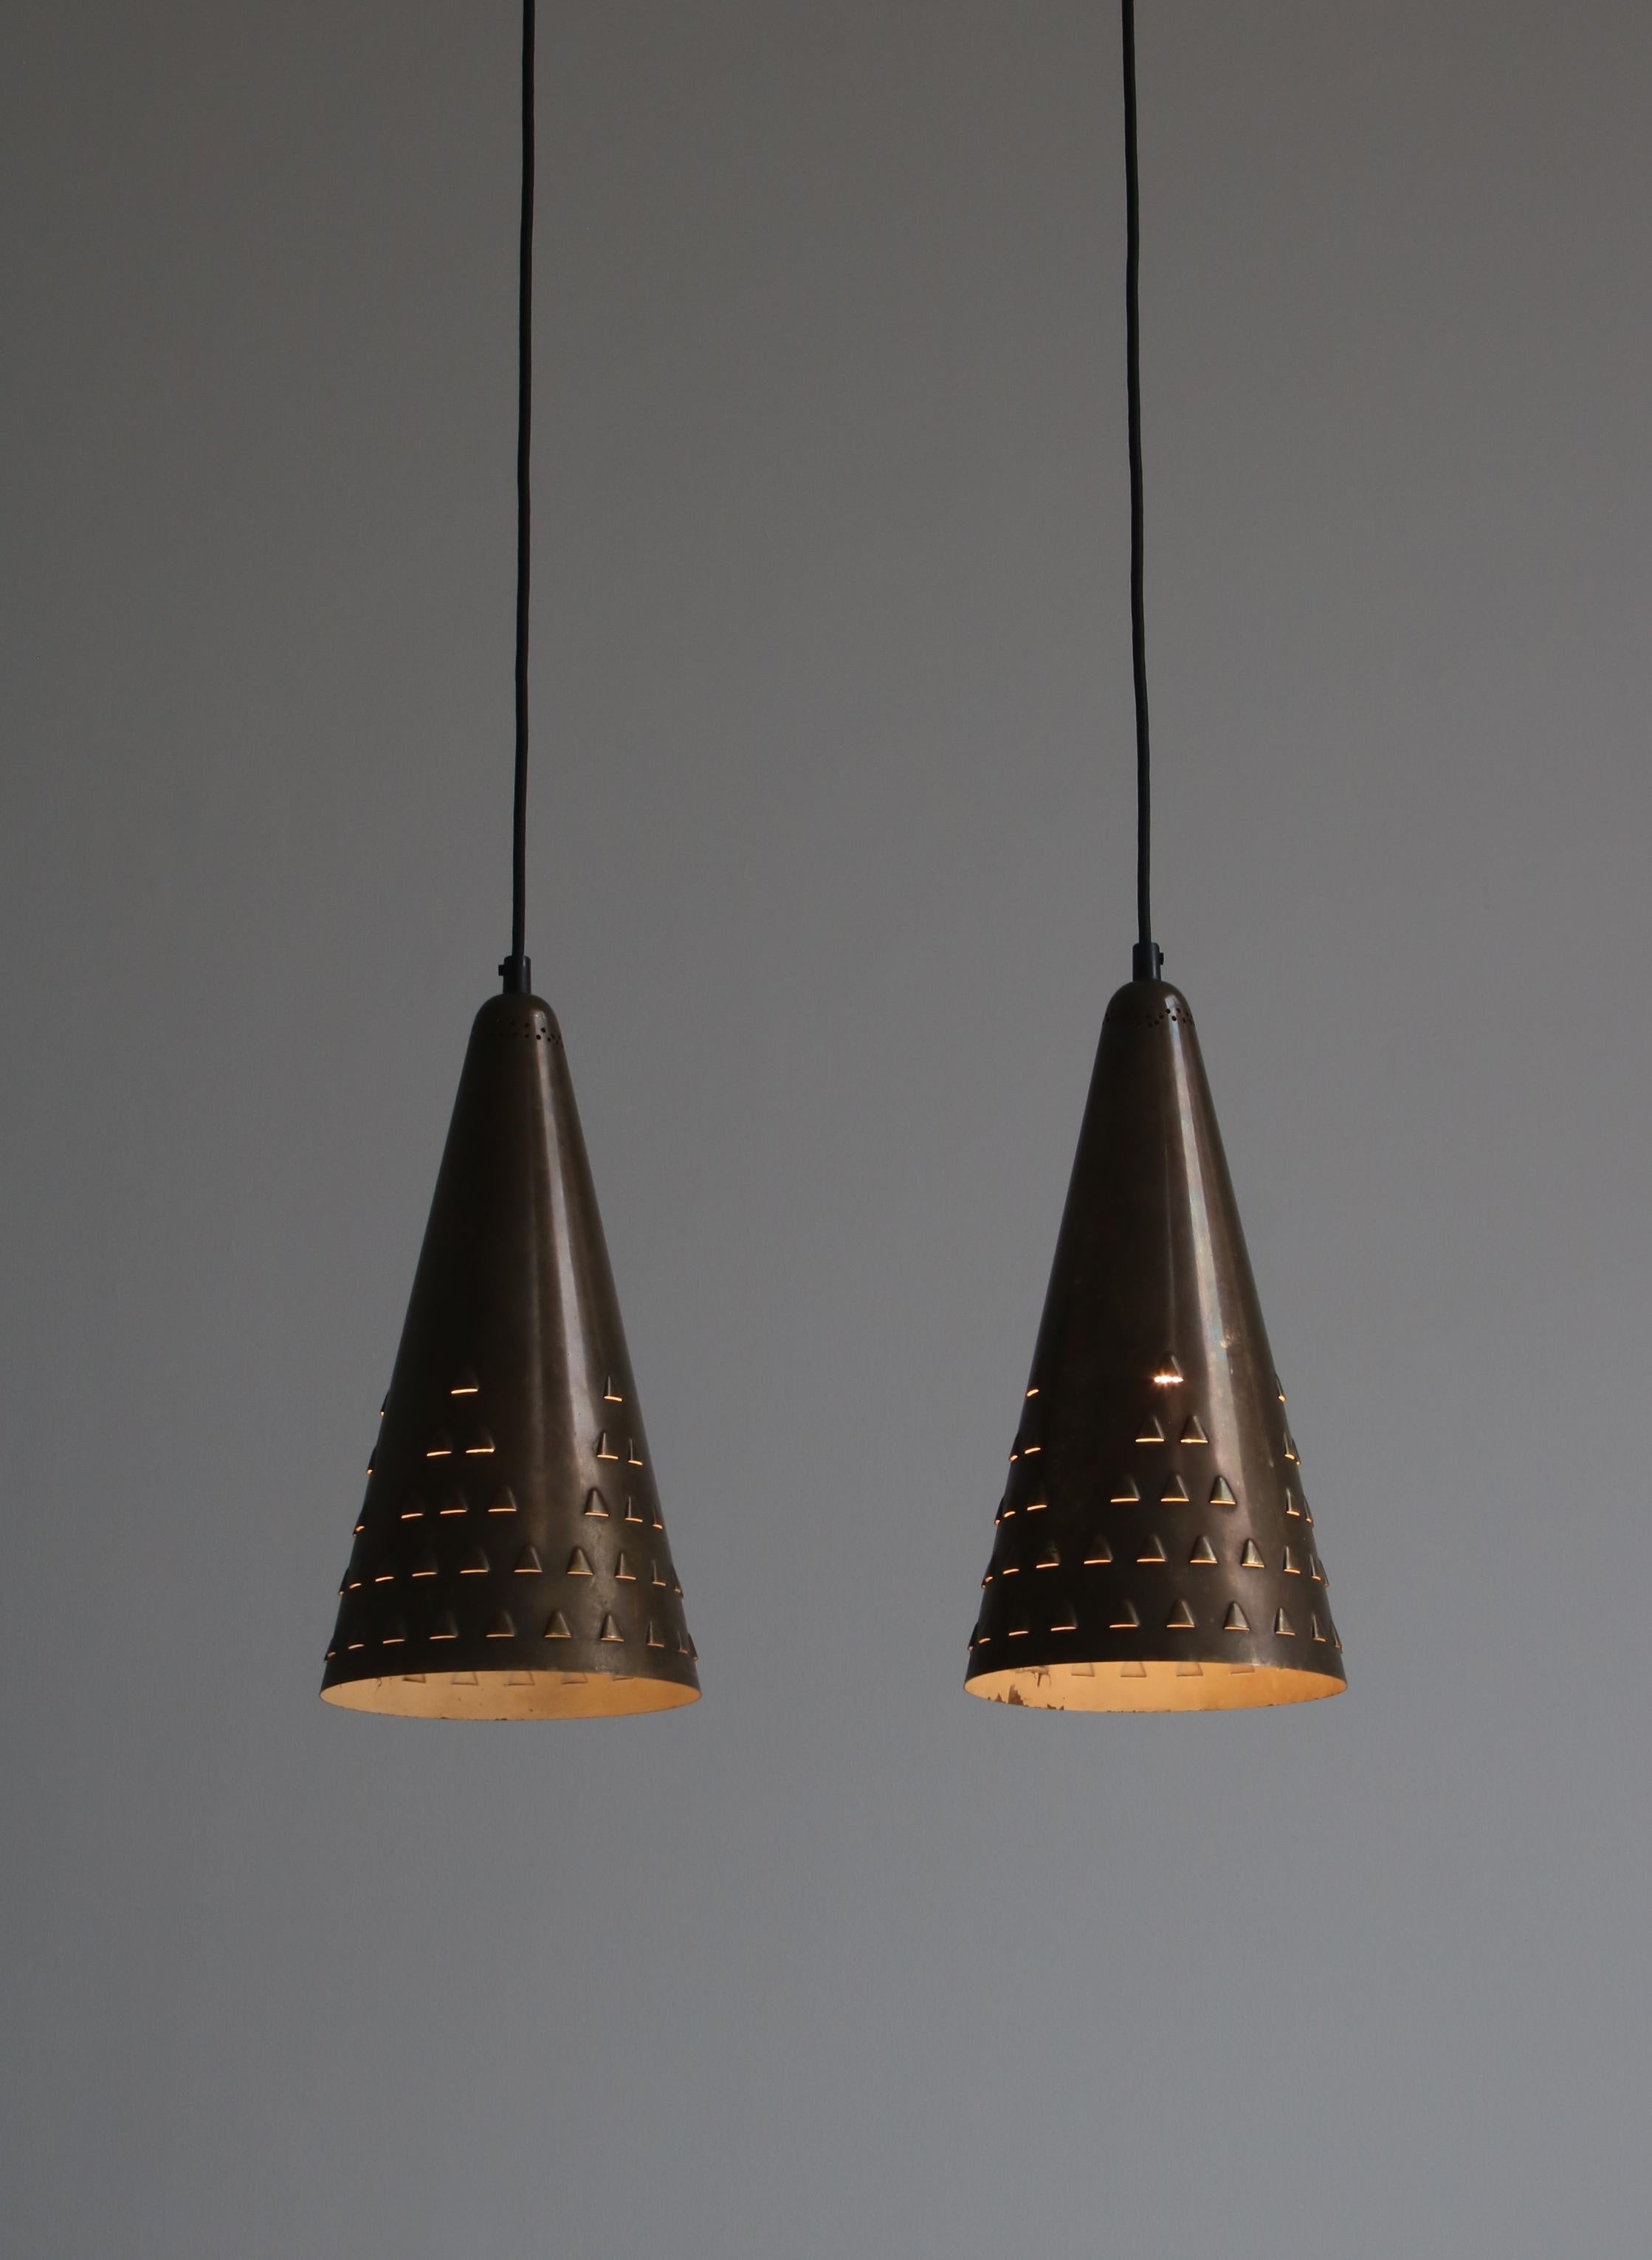 Large Pendants in Patinated Brass by Brockmann-Petersen, Danish Modern, 1953 For Sale 7